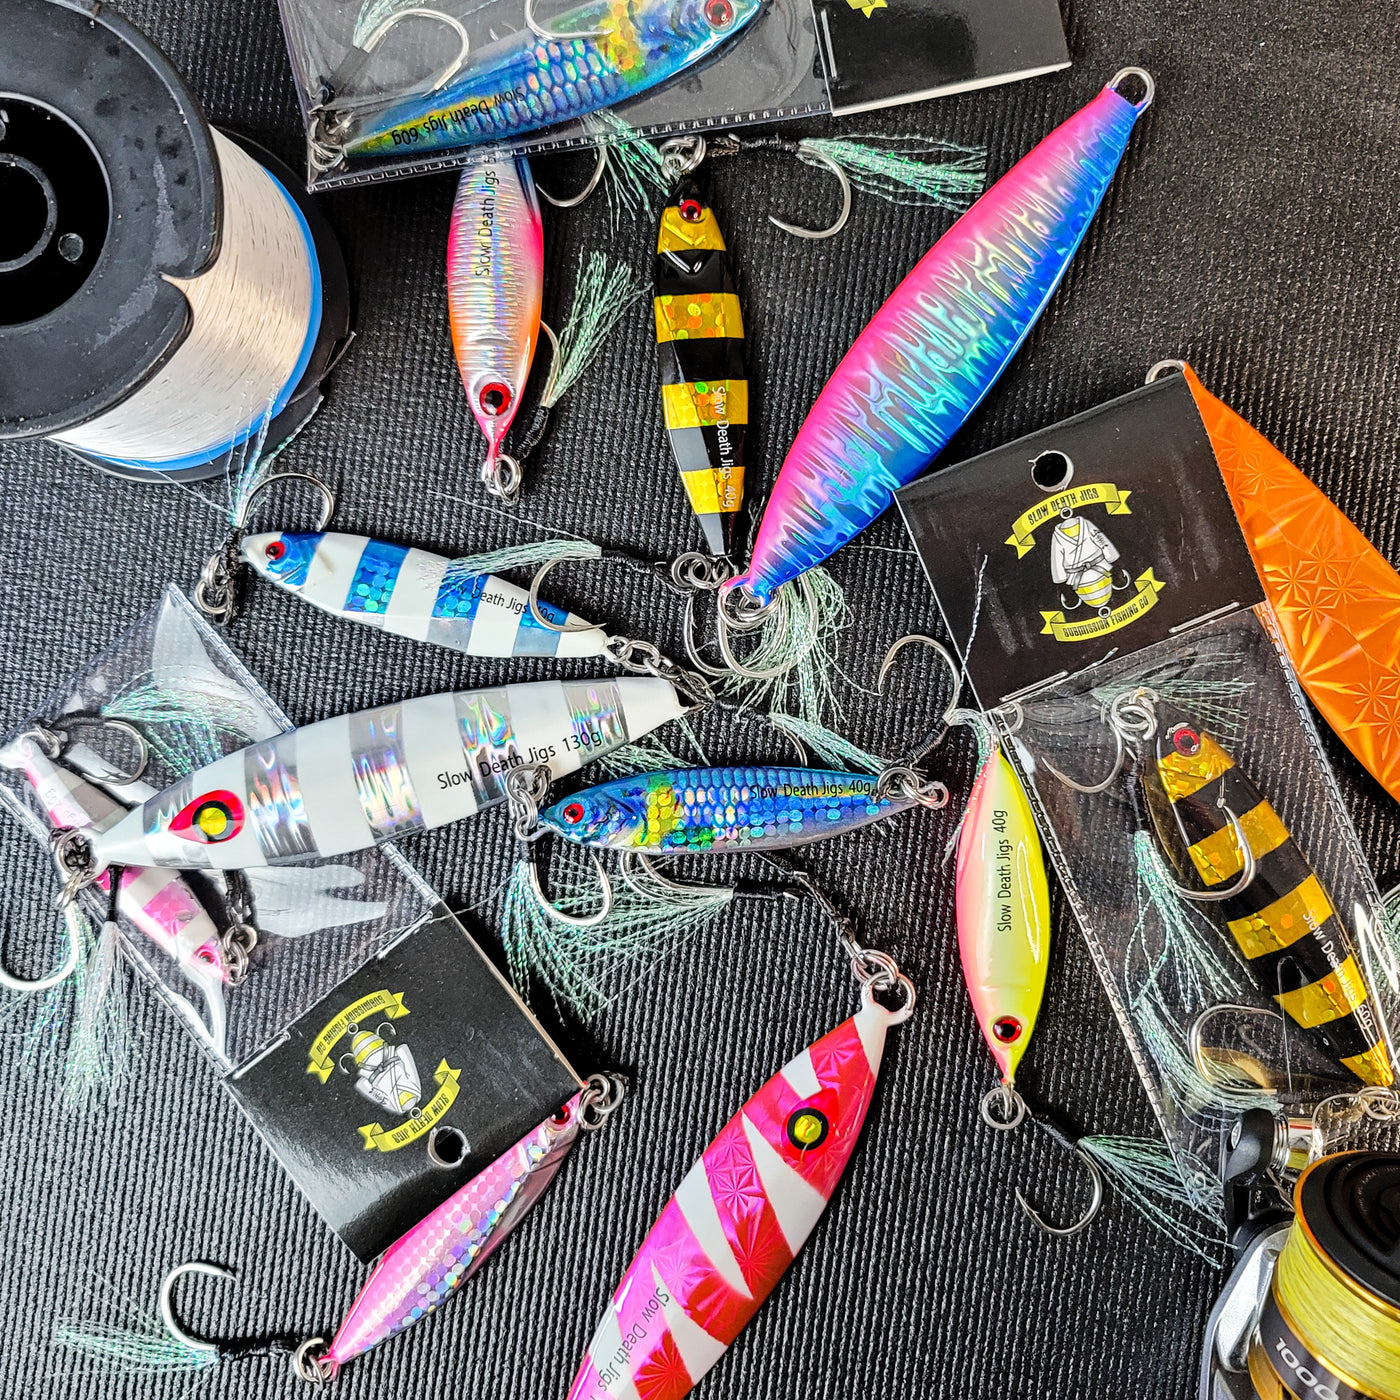 Five styles of yellowtail jigs for every angler's tackle box